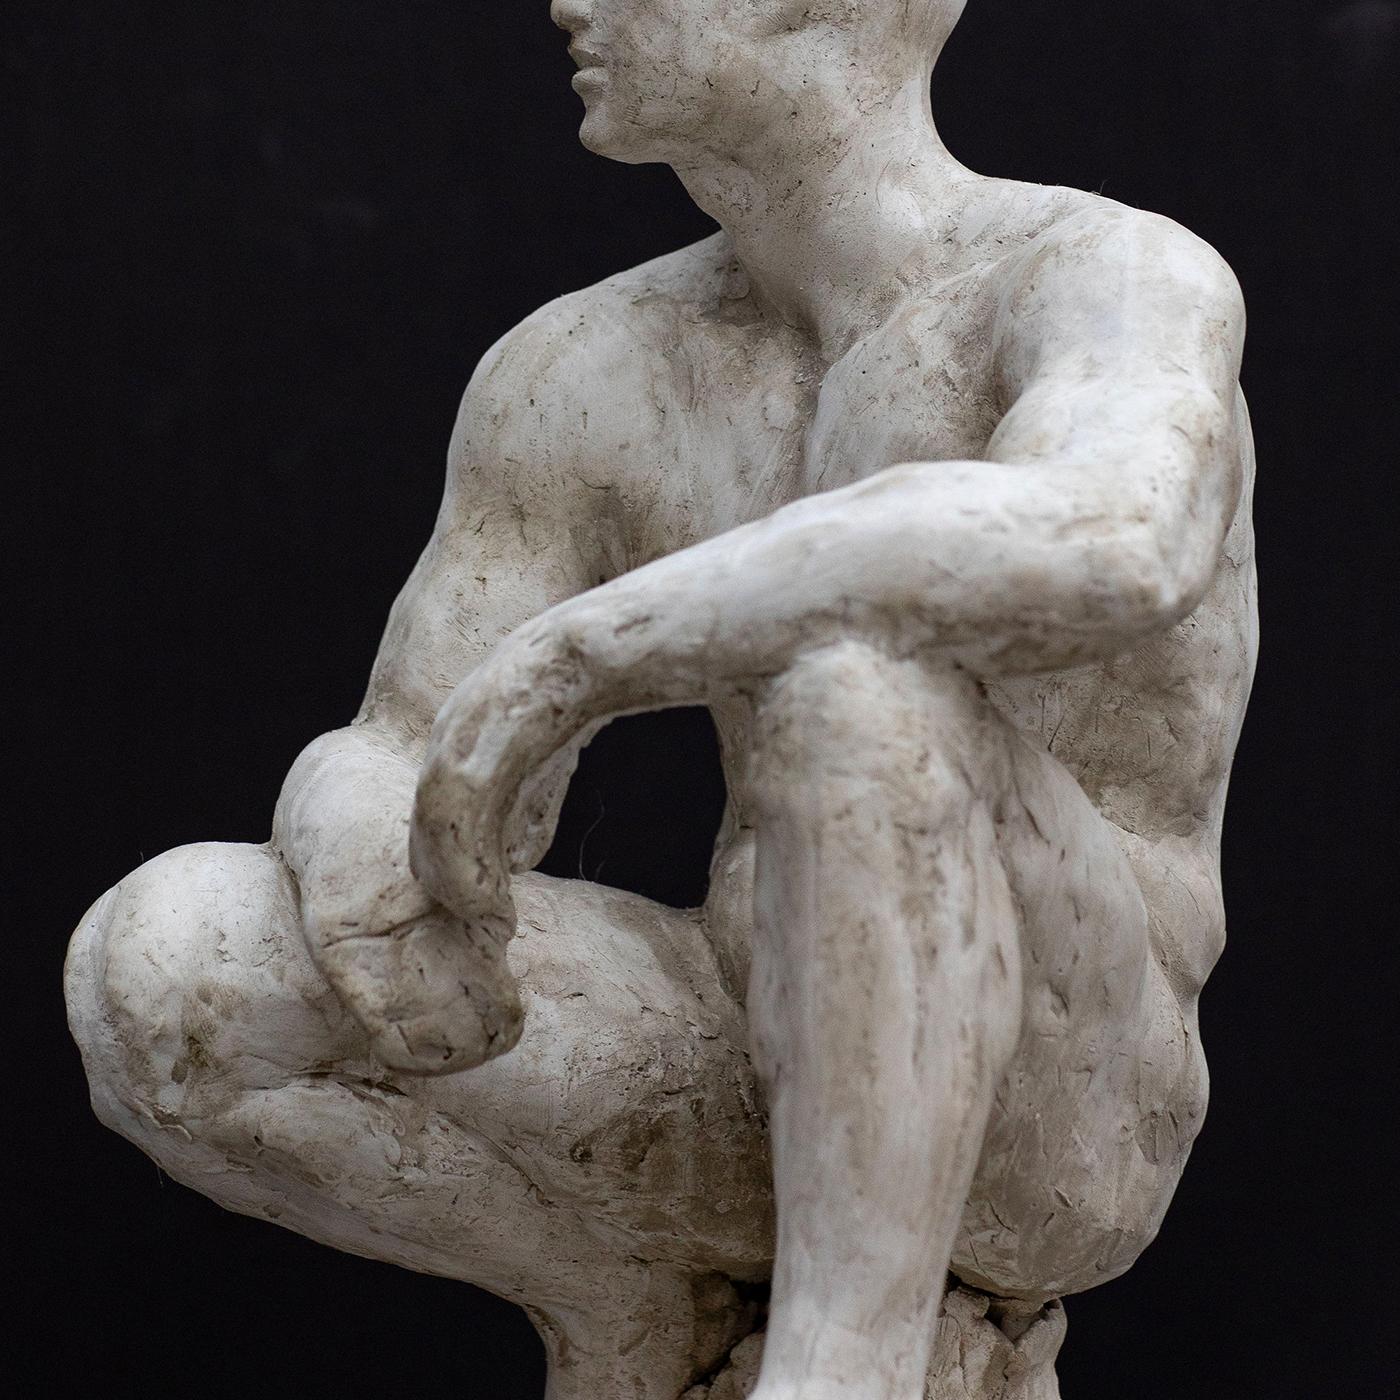 This sculpture by Raffaello Romanelli is a modern rendition of Romano Romanelli's piece of the same name originally made in 1929-31. Made in plaster, the piece maintains the accurate attention to anatomy and reveals details in the musculature and